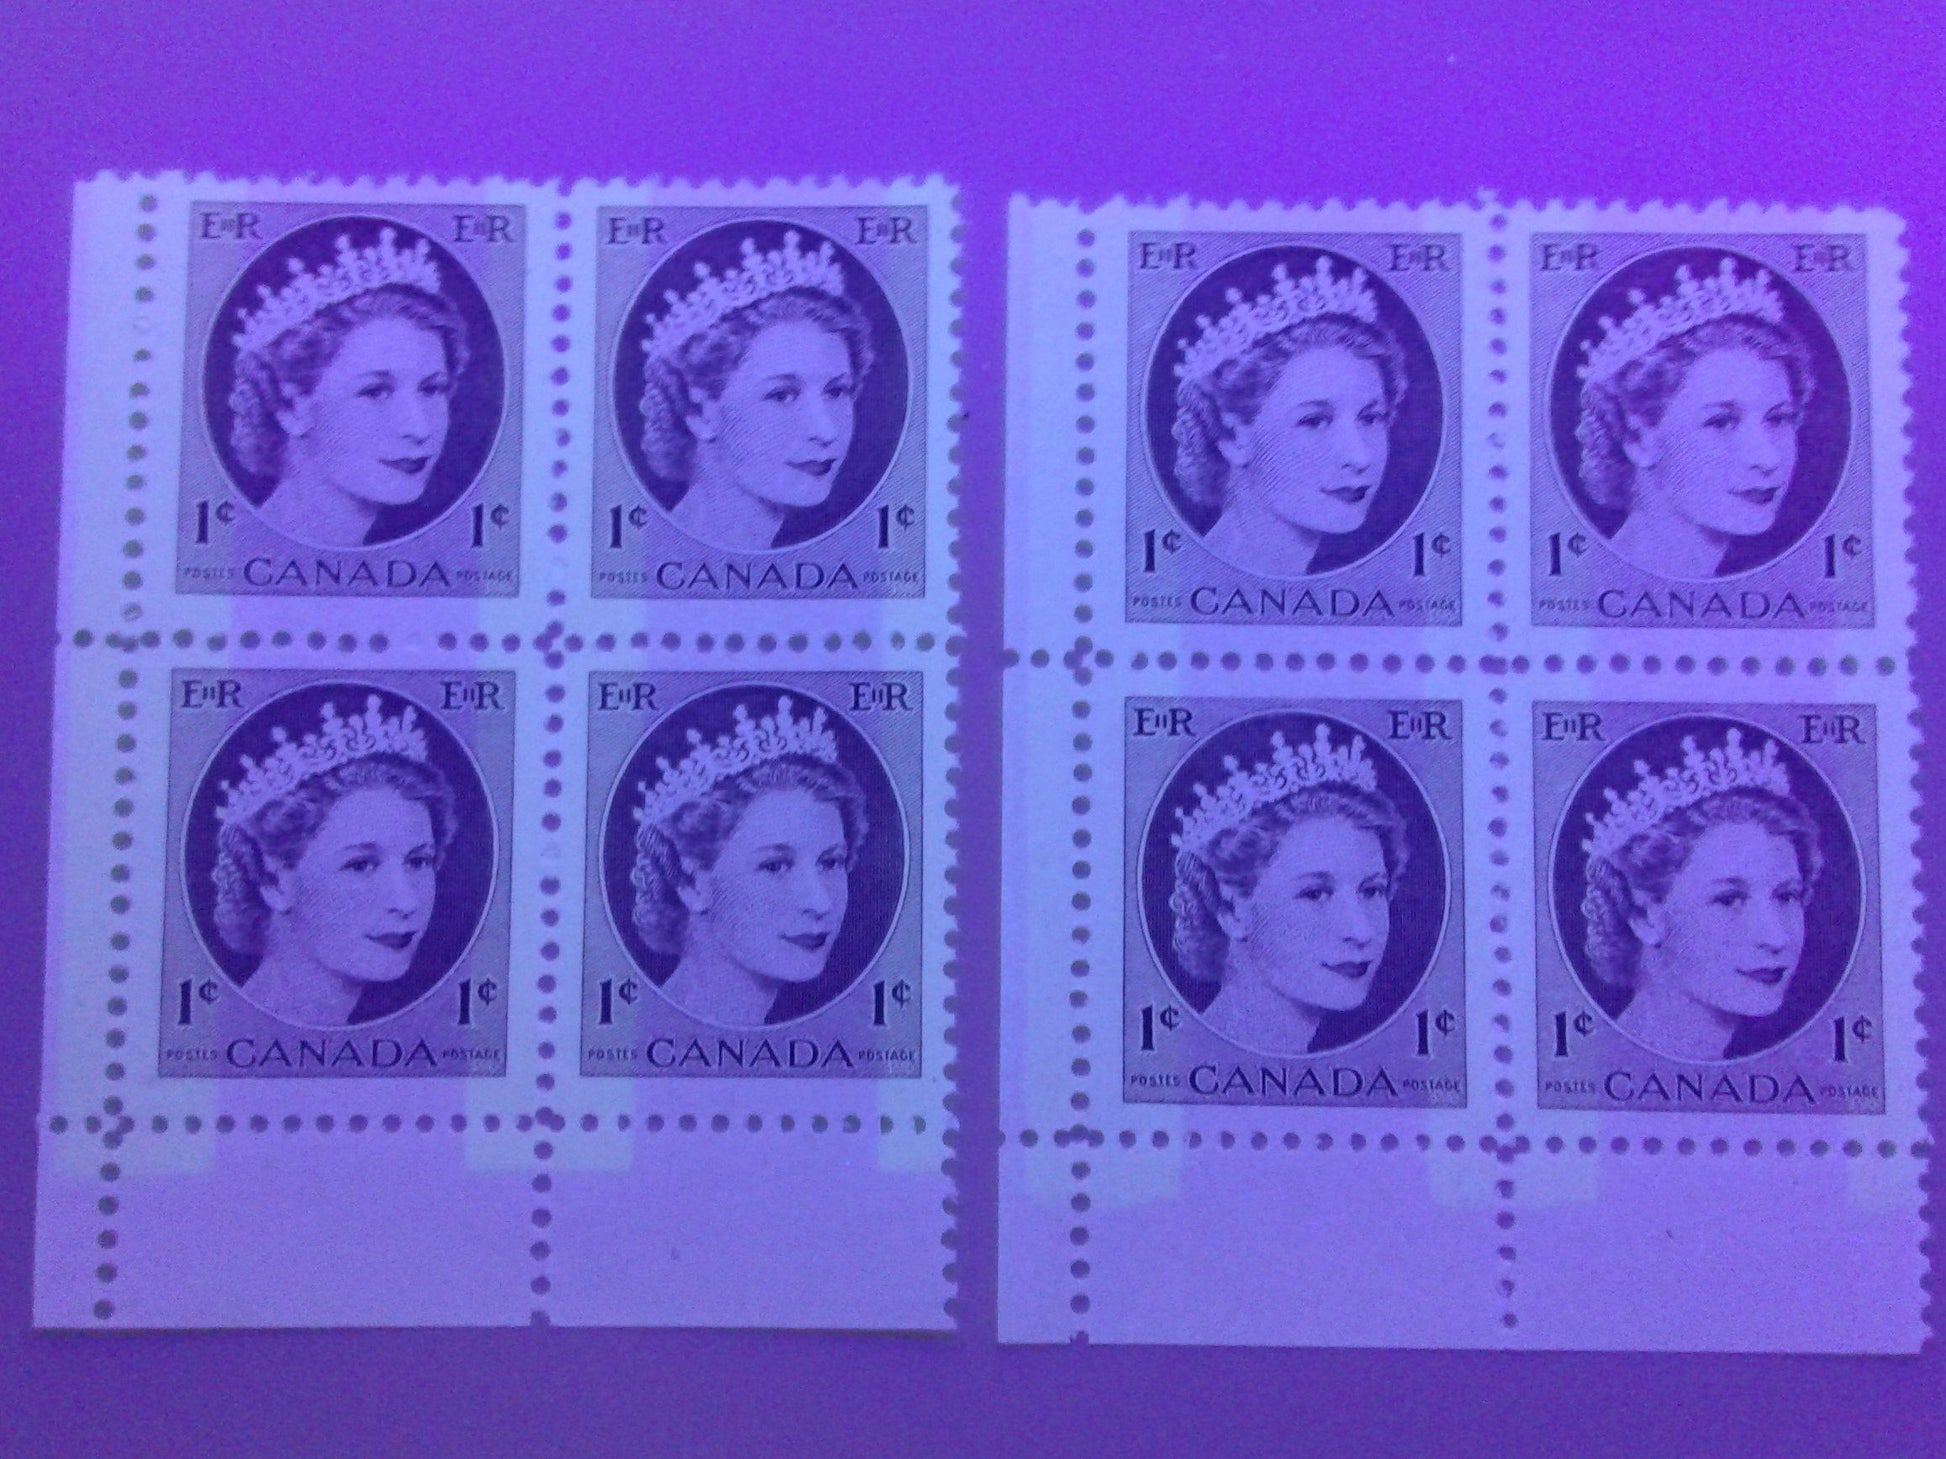 Canada #337p(var) 1c Chocolate Queen Elizabeth II, 1954-1962 Wilding Issue, Upper Right Blank Winnipeg Tagged Blocks of 4, Three Different, Various Perfs., DF Gr Vertically Ribbed Paper, Streaky Semi Gloss Gum, Bluish White Tagging With Extra Spot, VFNH Brixton Chrome 